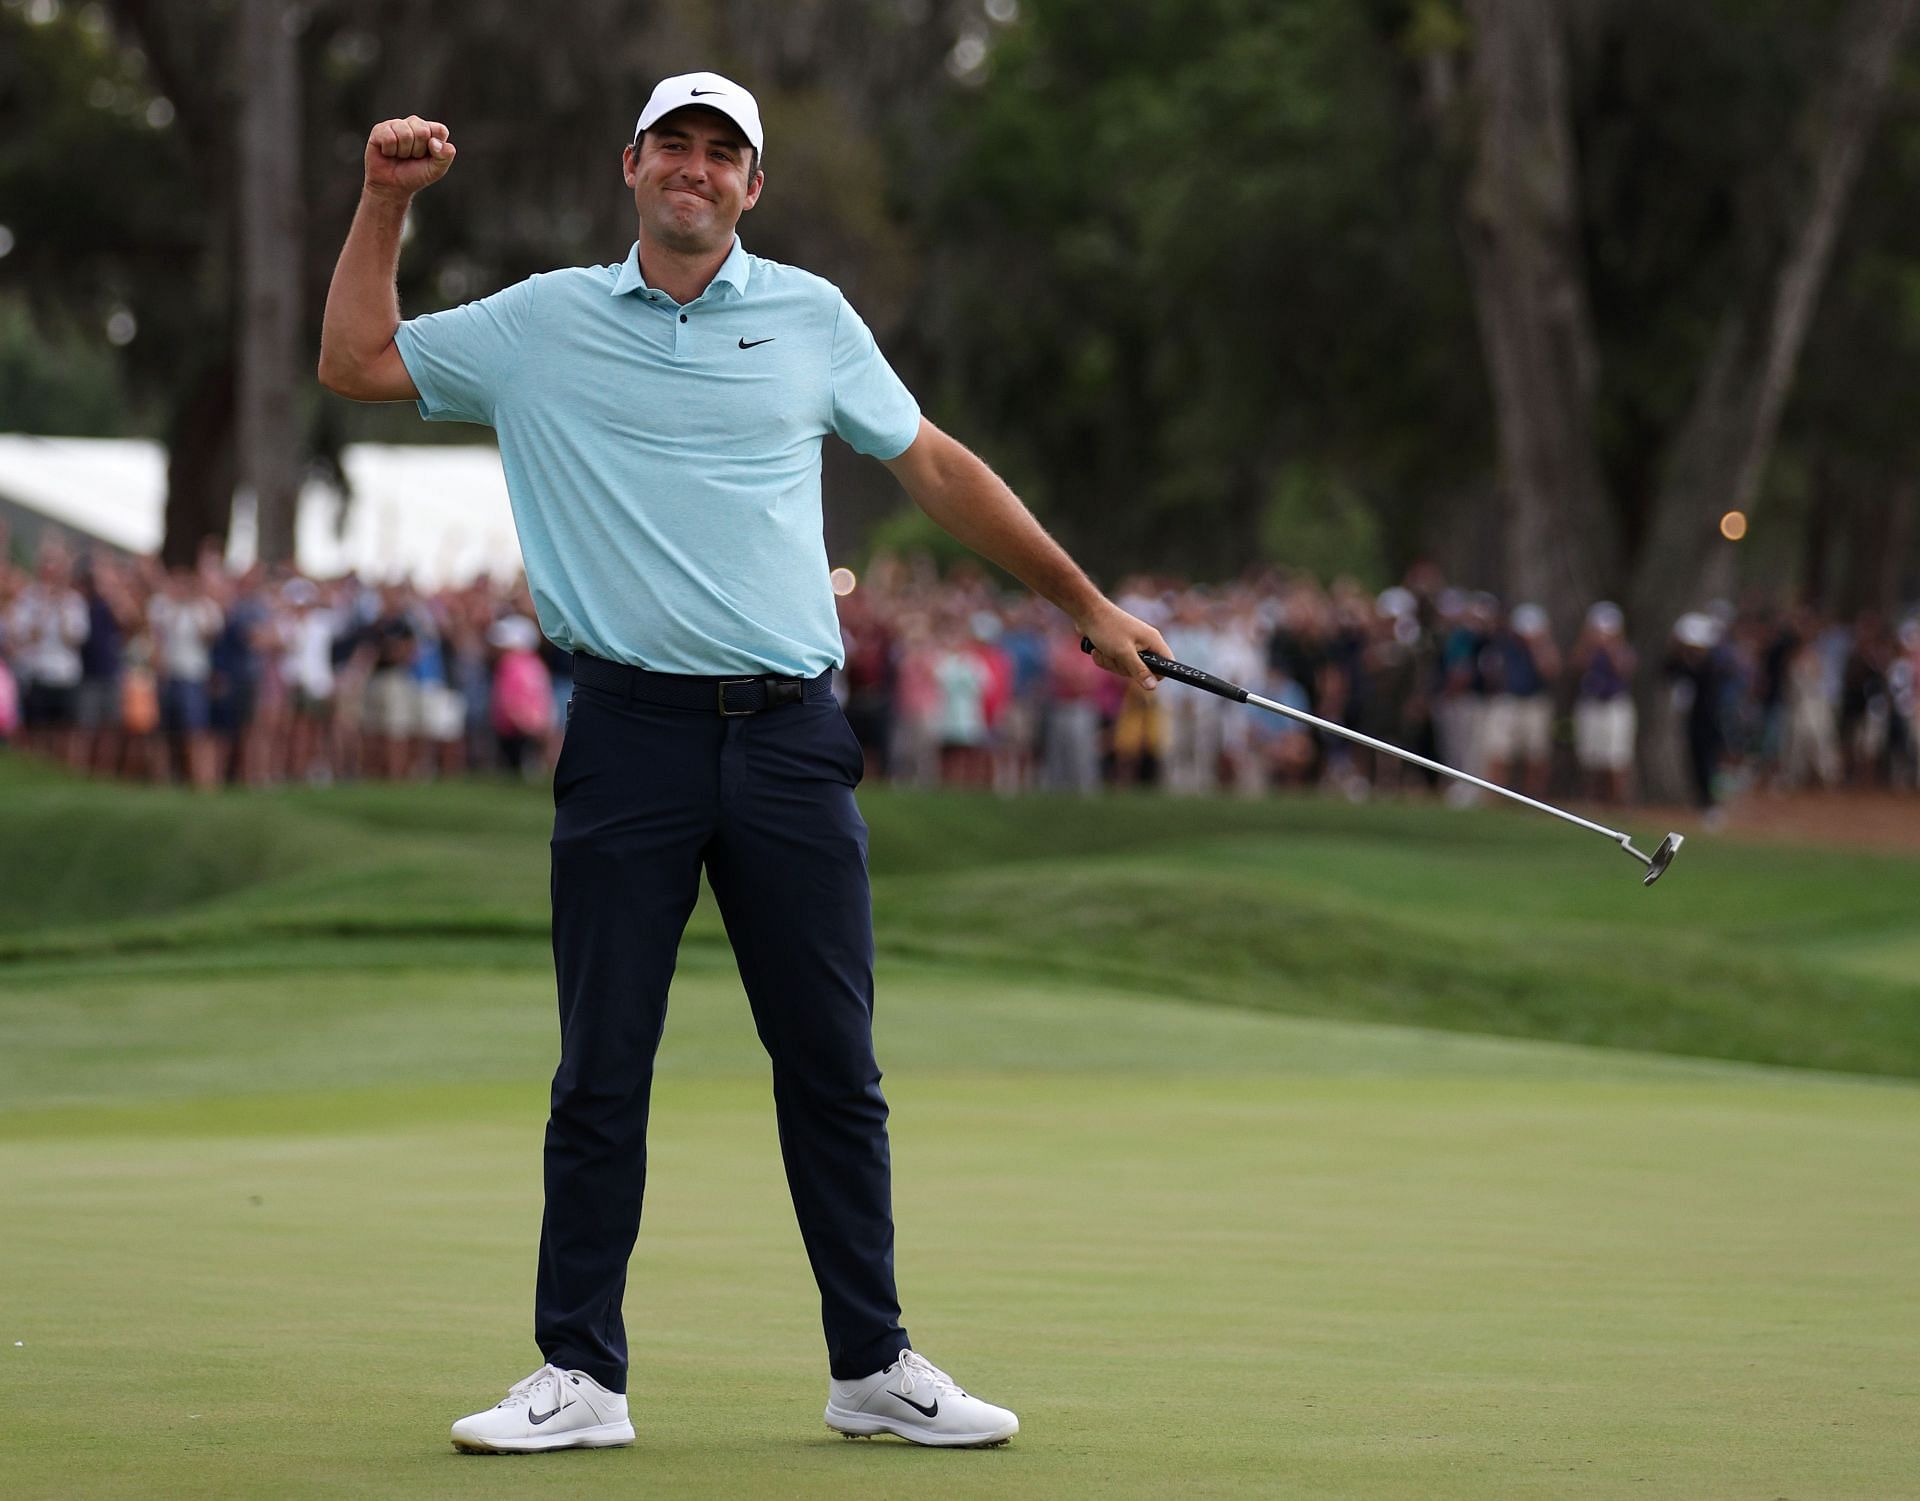 On March 12, 2023, in Ponte Vedra Beach, Florida, Scottie Scheffler celebrates after sinking his winning putt on the 18th green of THE PLAYERS Championship&#039;s final round at TPC Sawgrass.